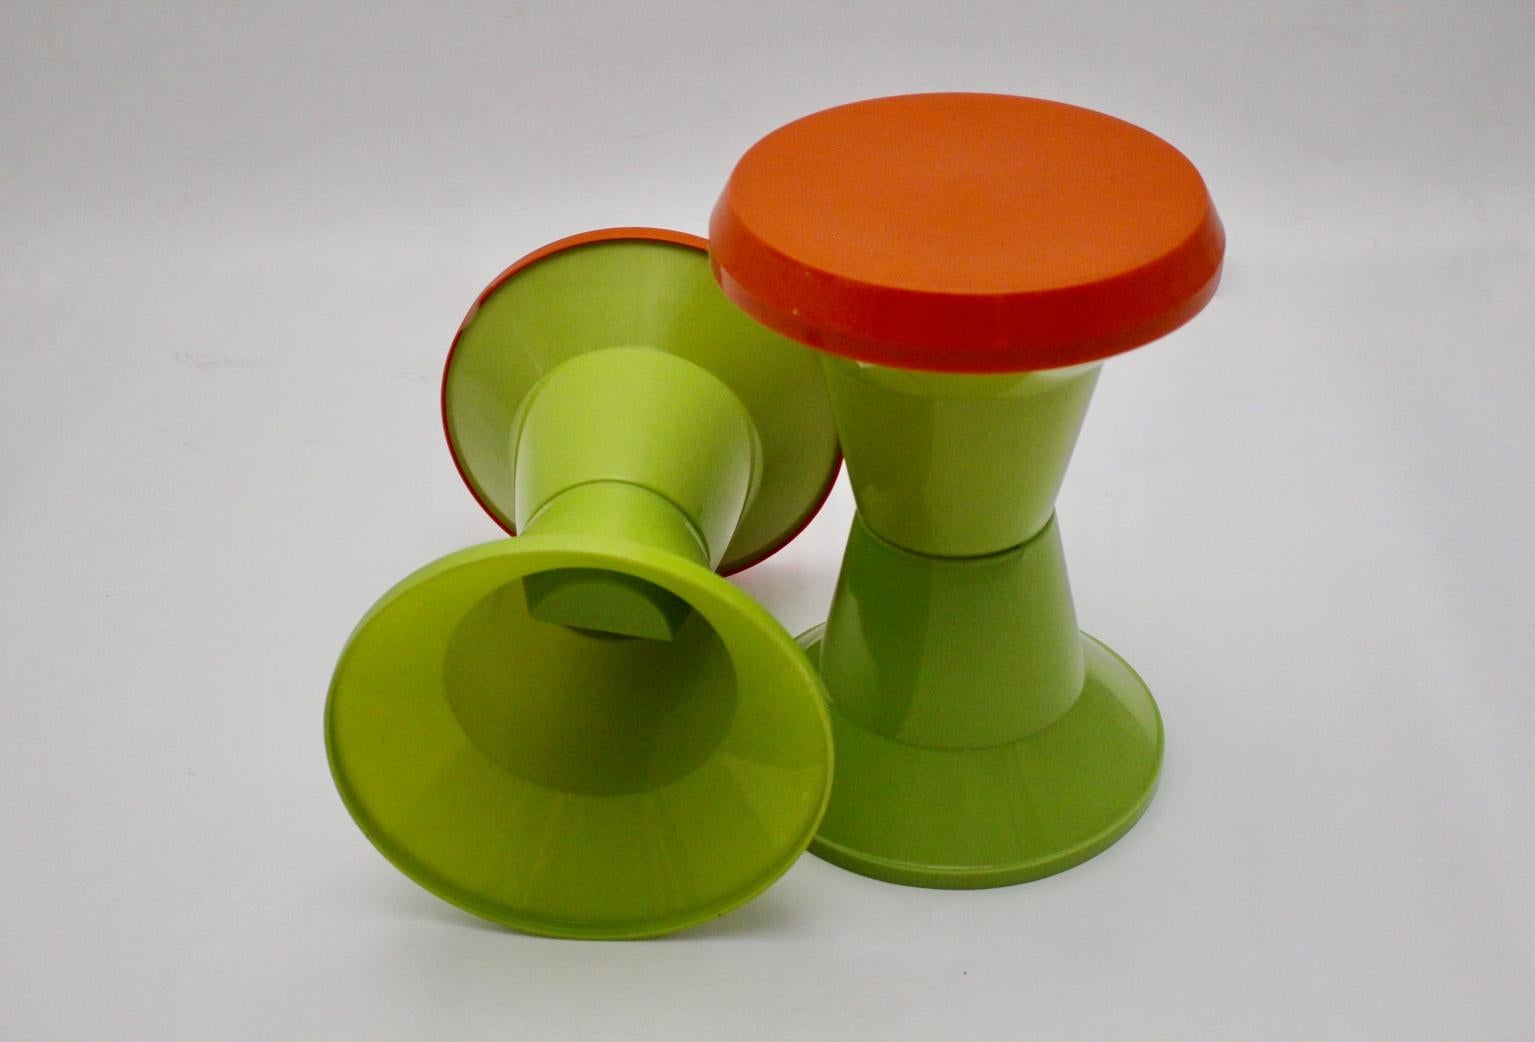 Late 20th Century Space Age Green and Red Vintage Plastic Stools Duo Pair circa 1970 Italy For Sale